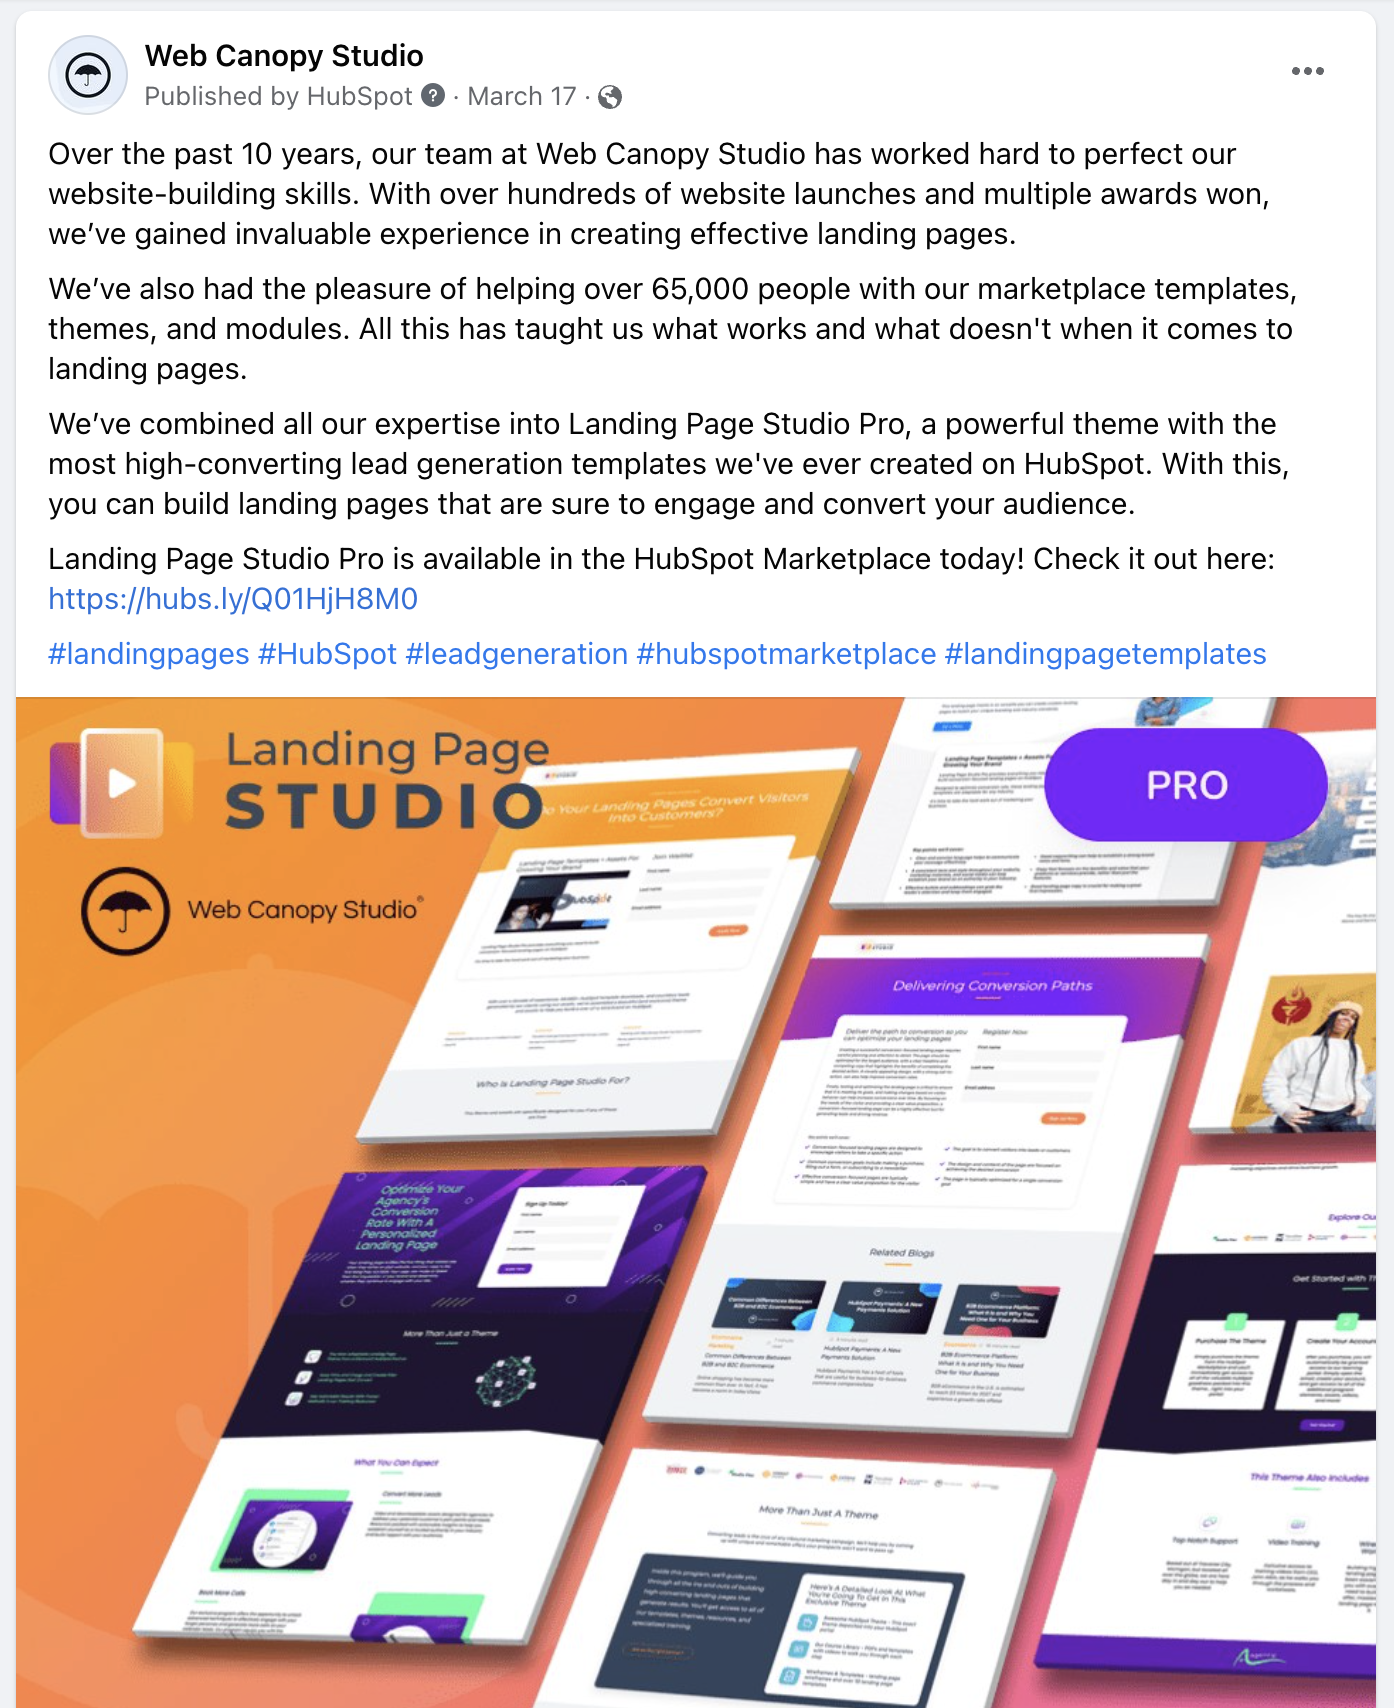 Facebook post from web canopy studio promoting the Landing Page Studio Pro theme